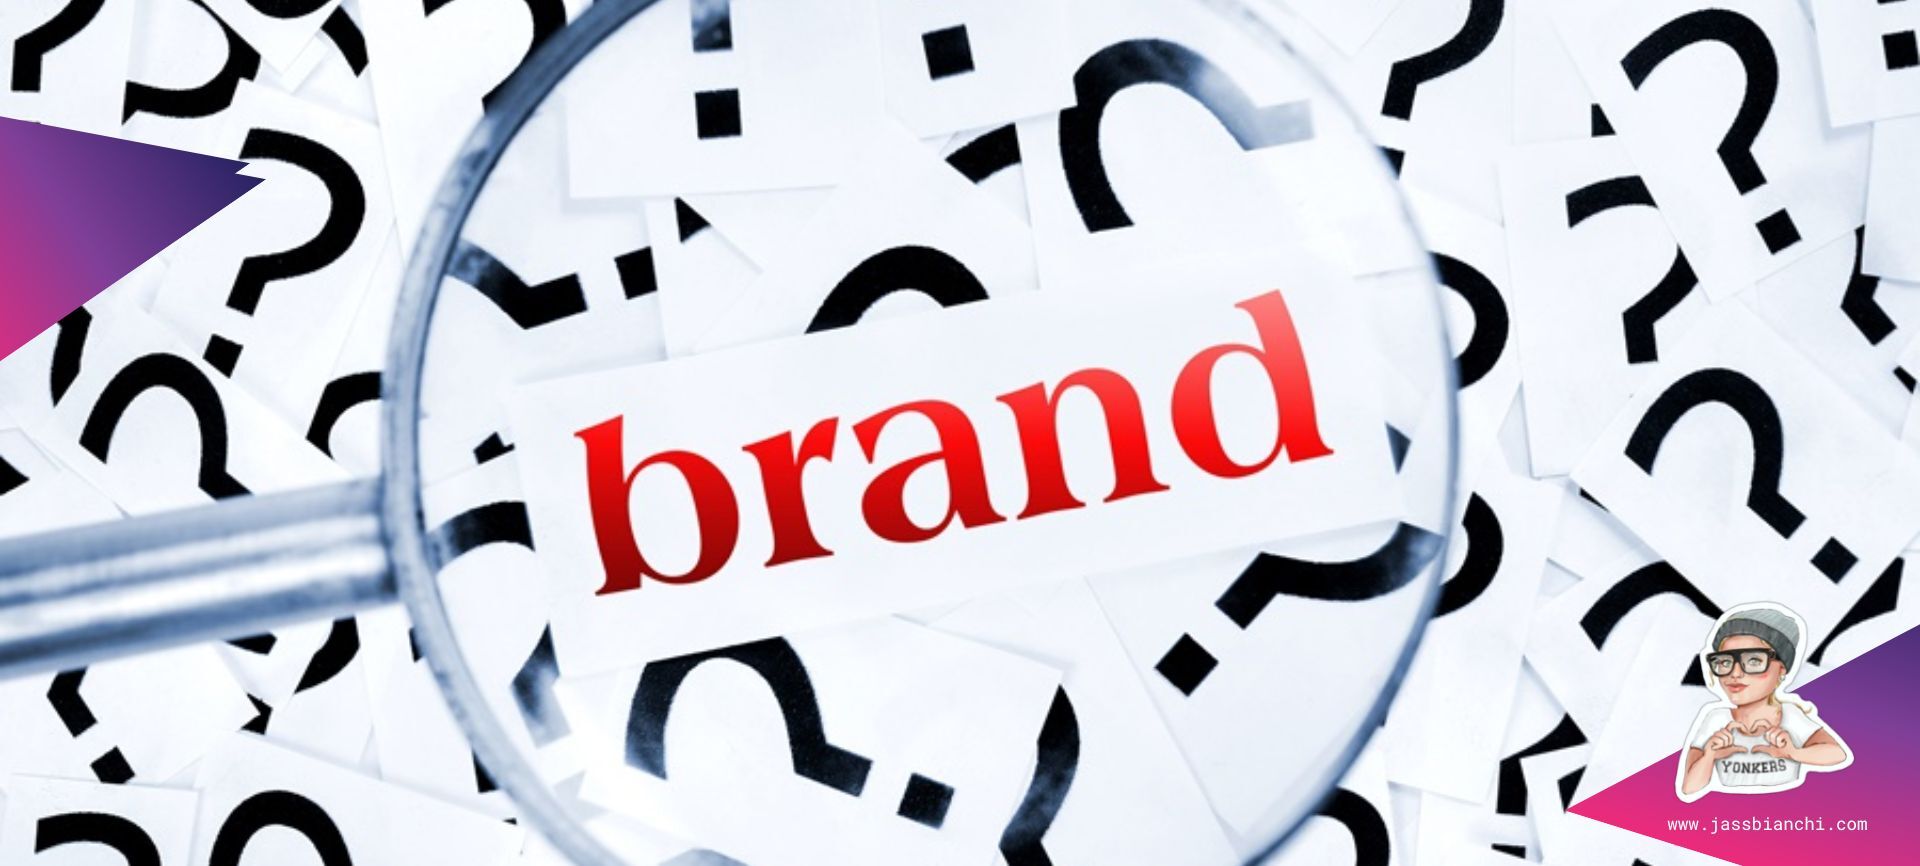 Trademarking Your Brand Name: What You Need to Know